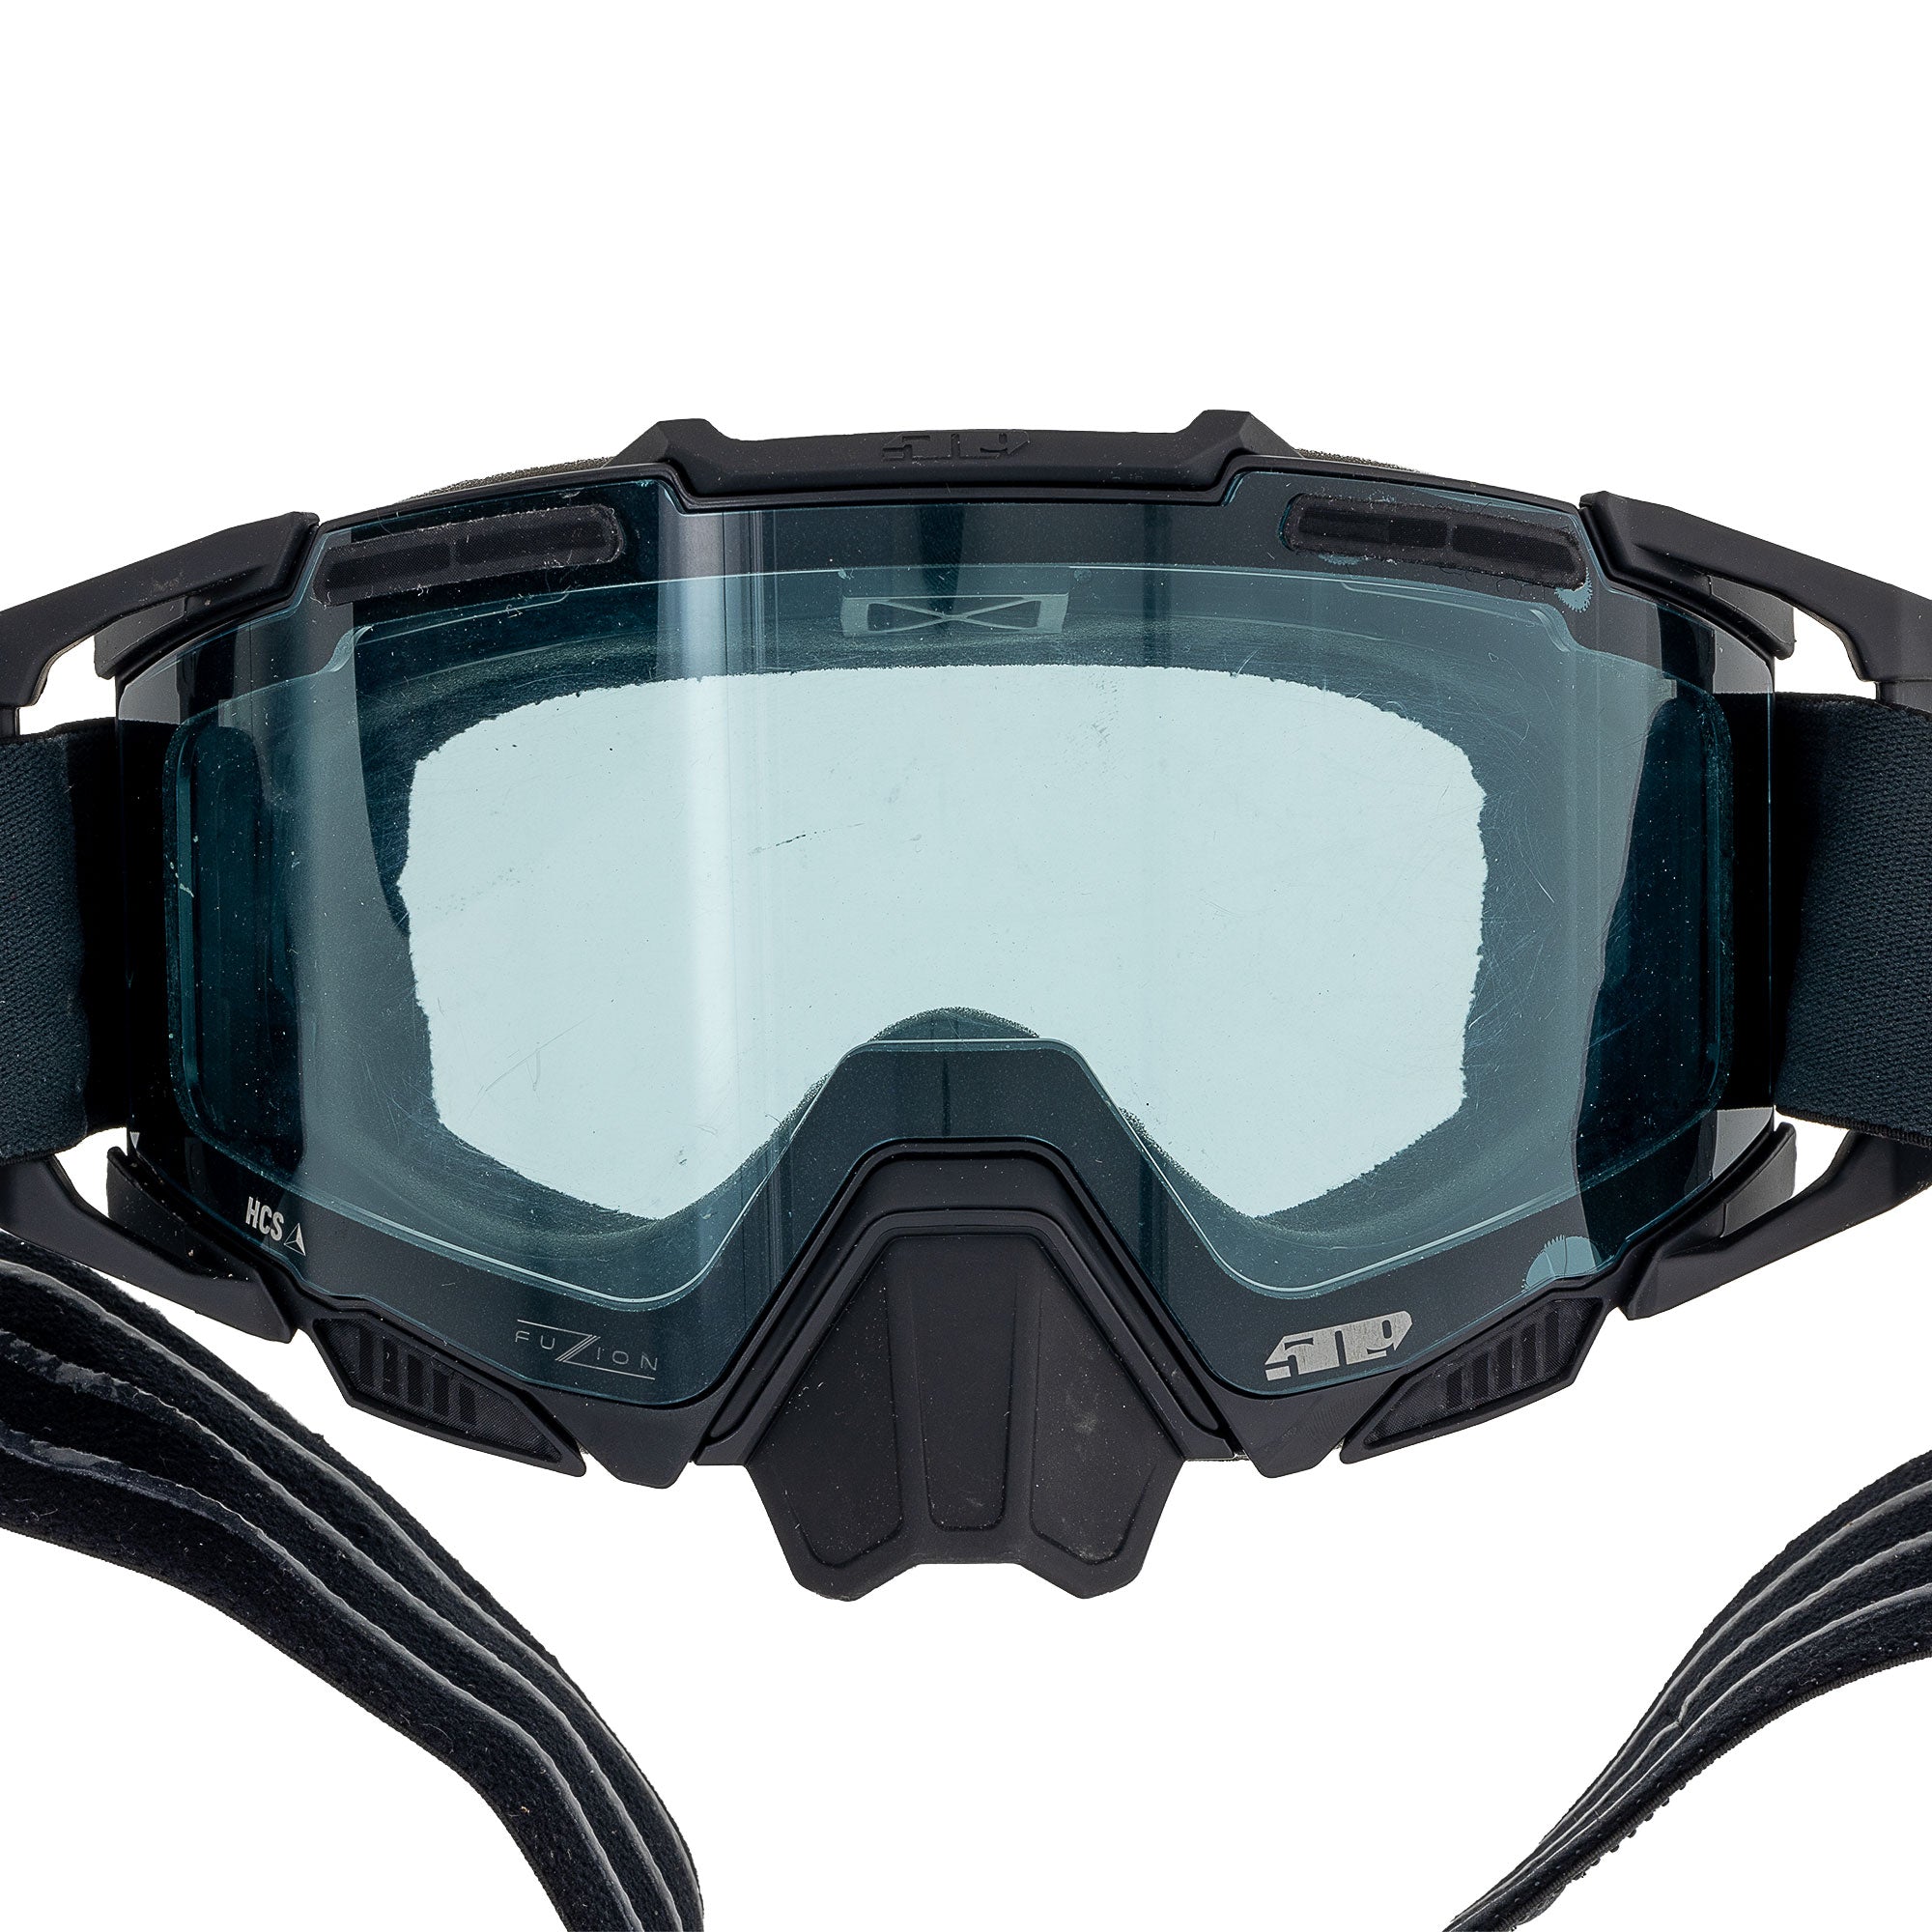 509 Sinister X7 Fuzion Flow Goggles F02012700-000-002